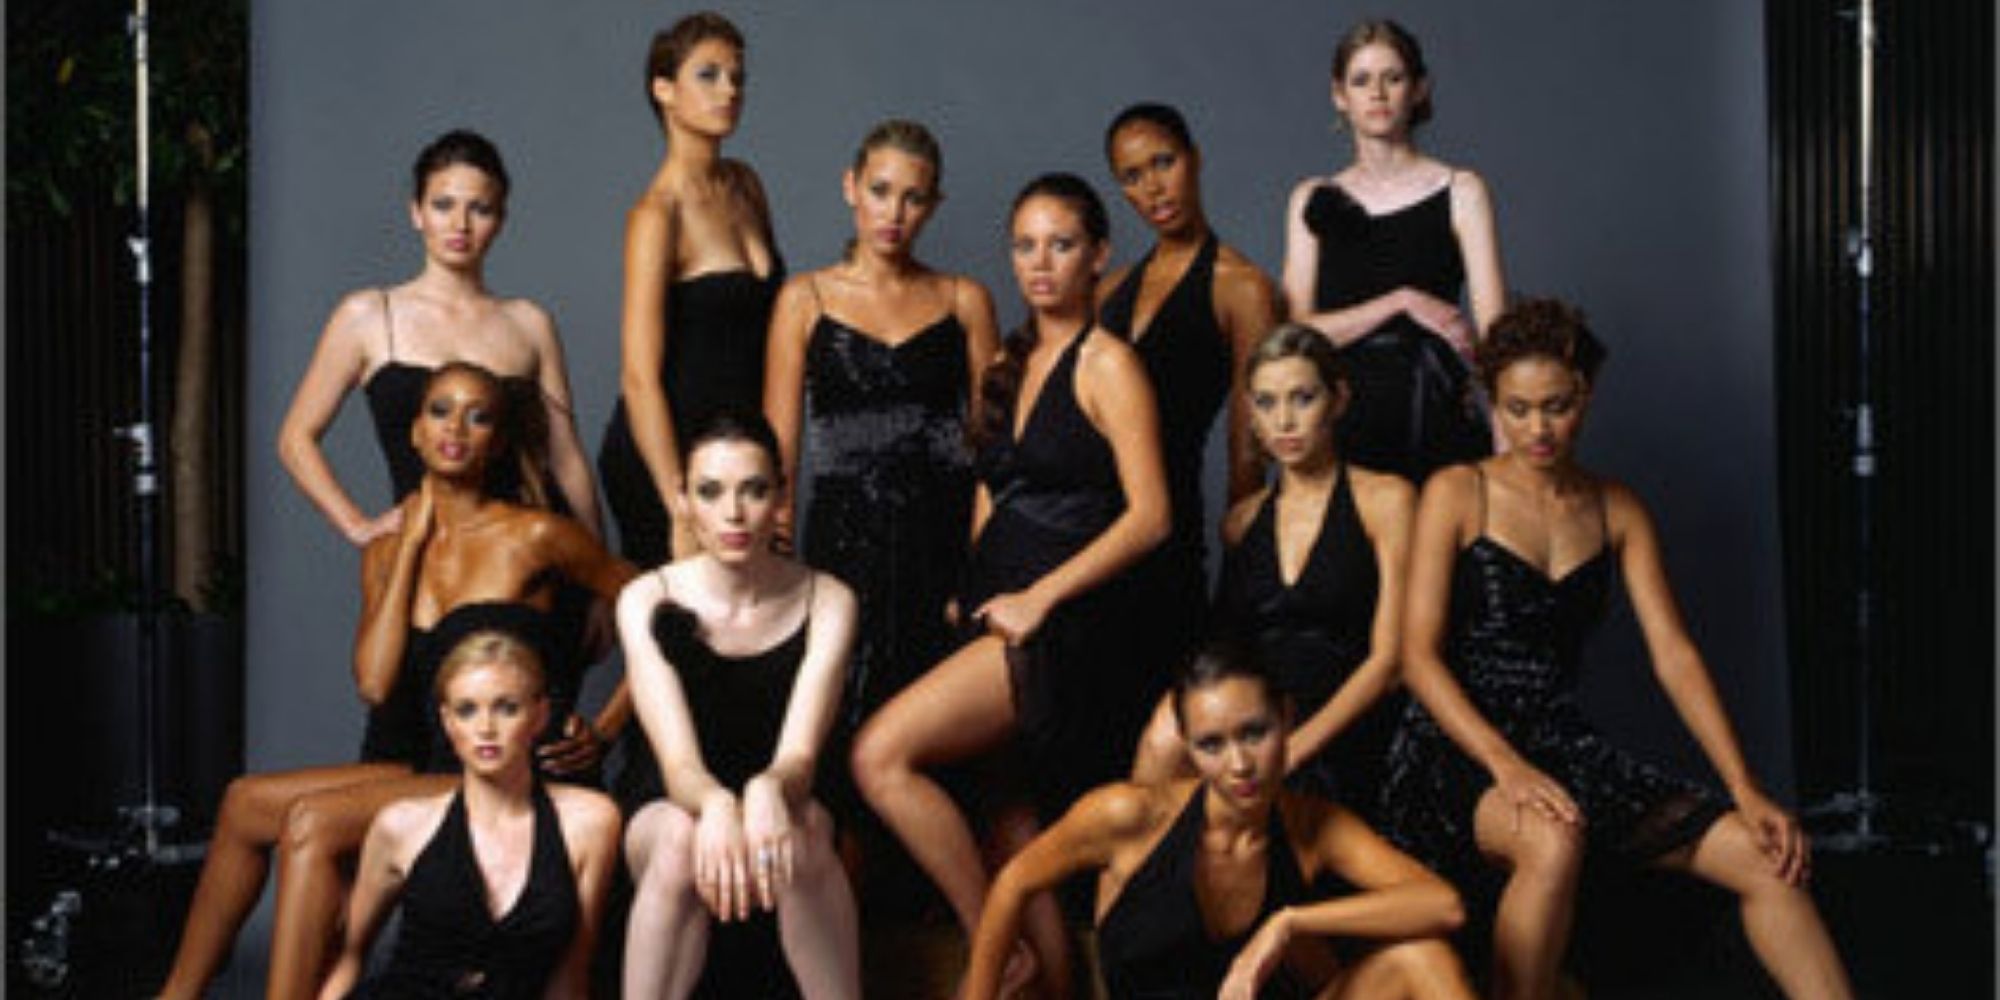 America S Next Top Model The First 10 Seasons Ranked According To Imdb